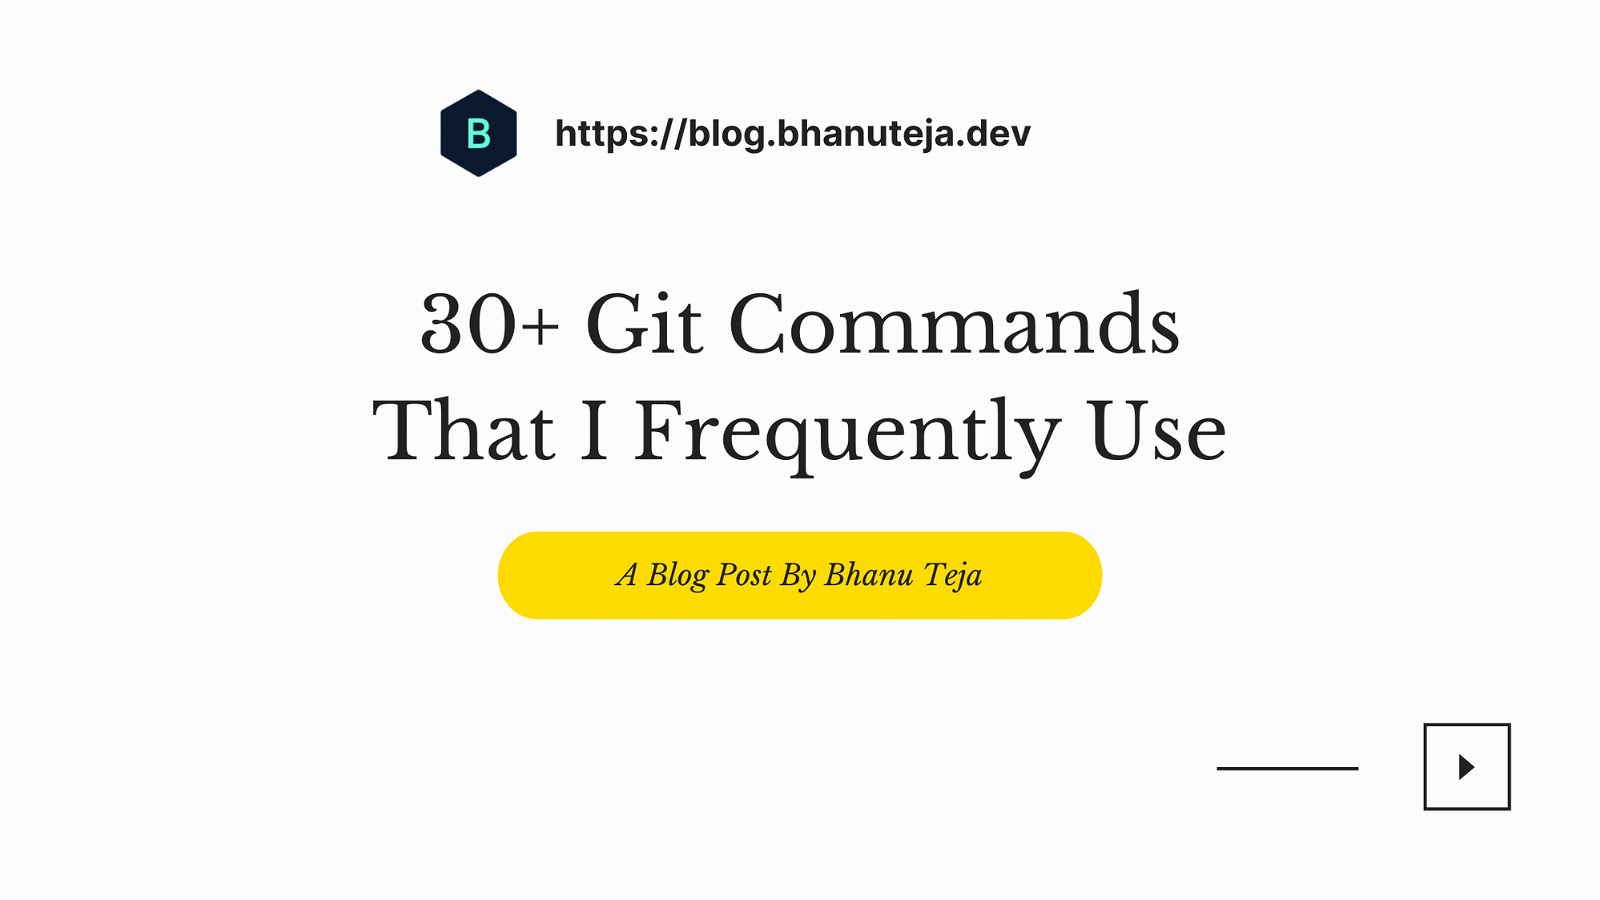 30+ Git Commands That I Frequently Use